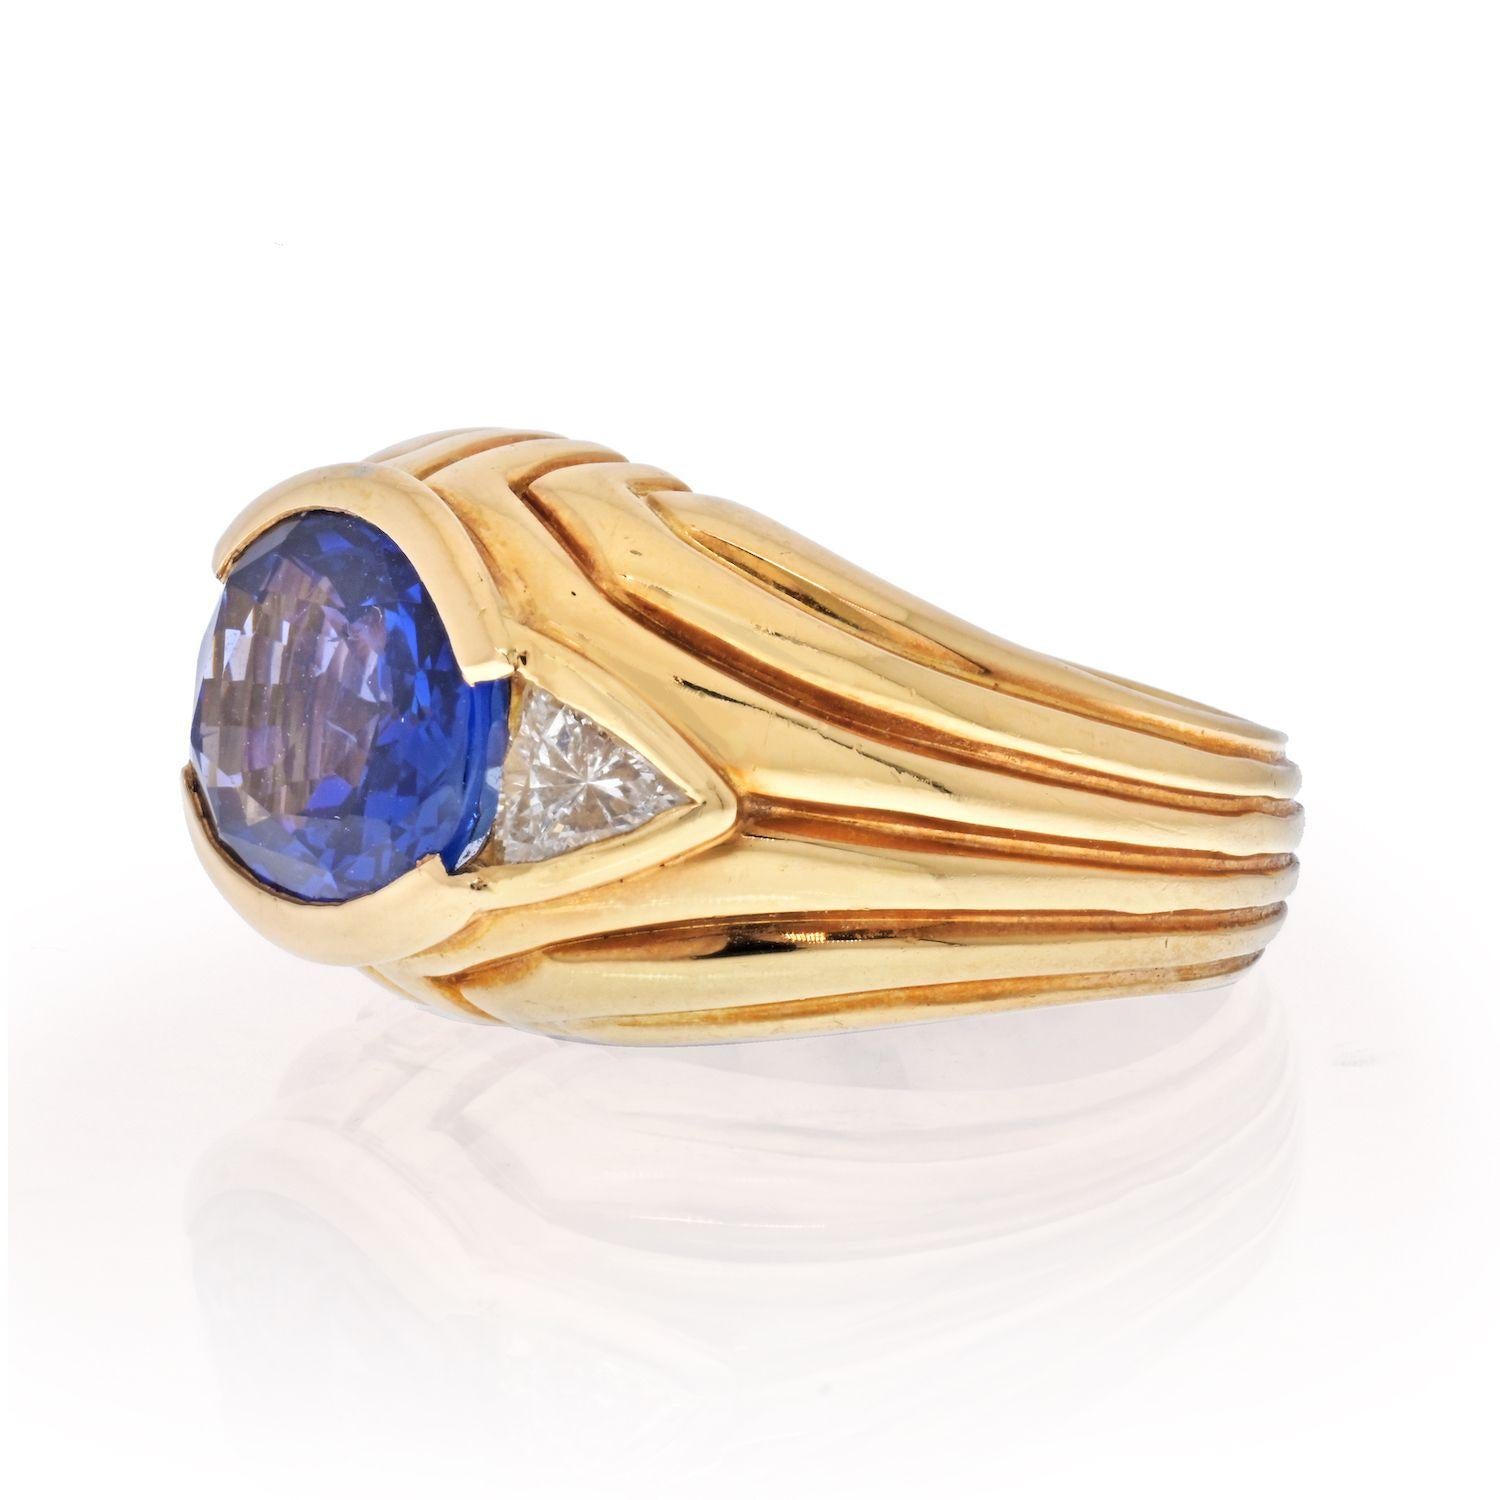 Vintage sapphire and diamond cocktail ring by Bvlgari. Mounted in 18k yellow gold the ring features a 4.50 carat (approx.)  oval cut blue sapphire flanked by two trilliant cut diamonds. 